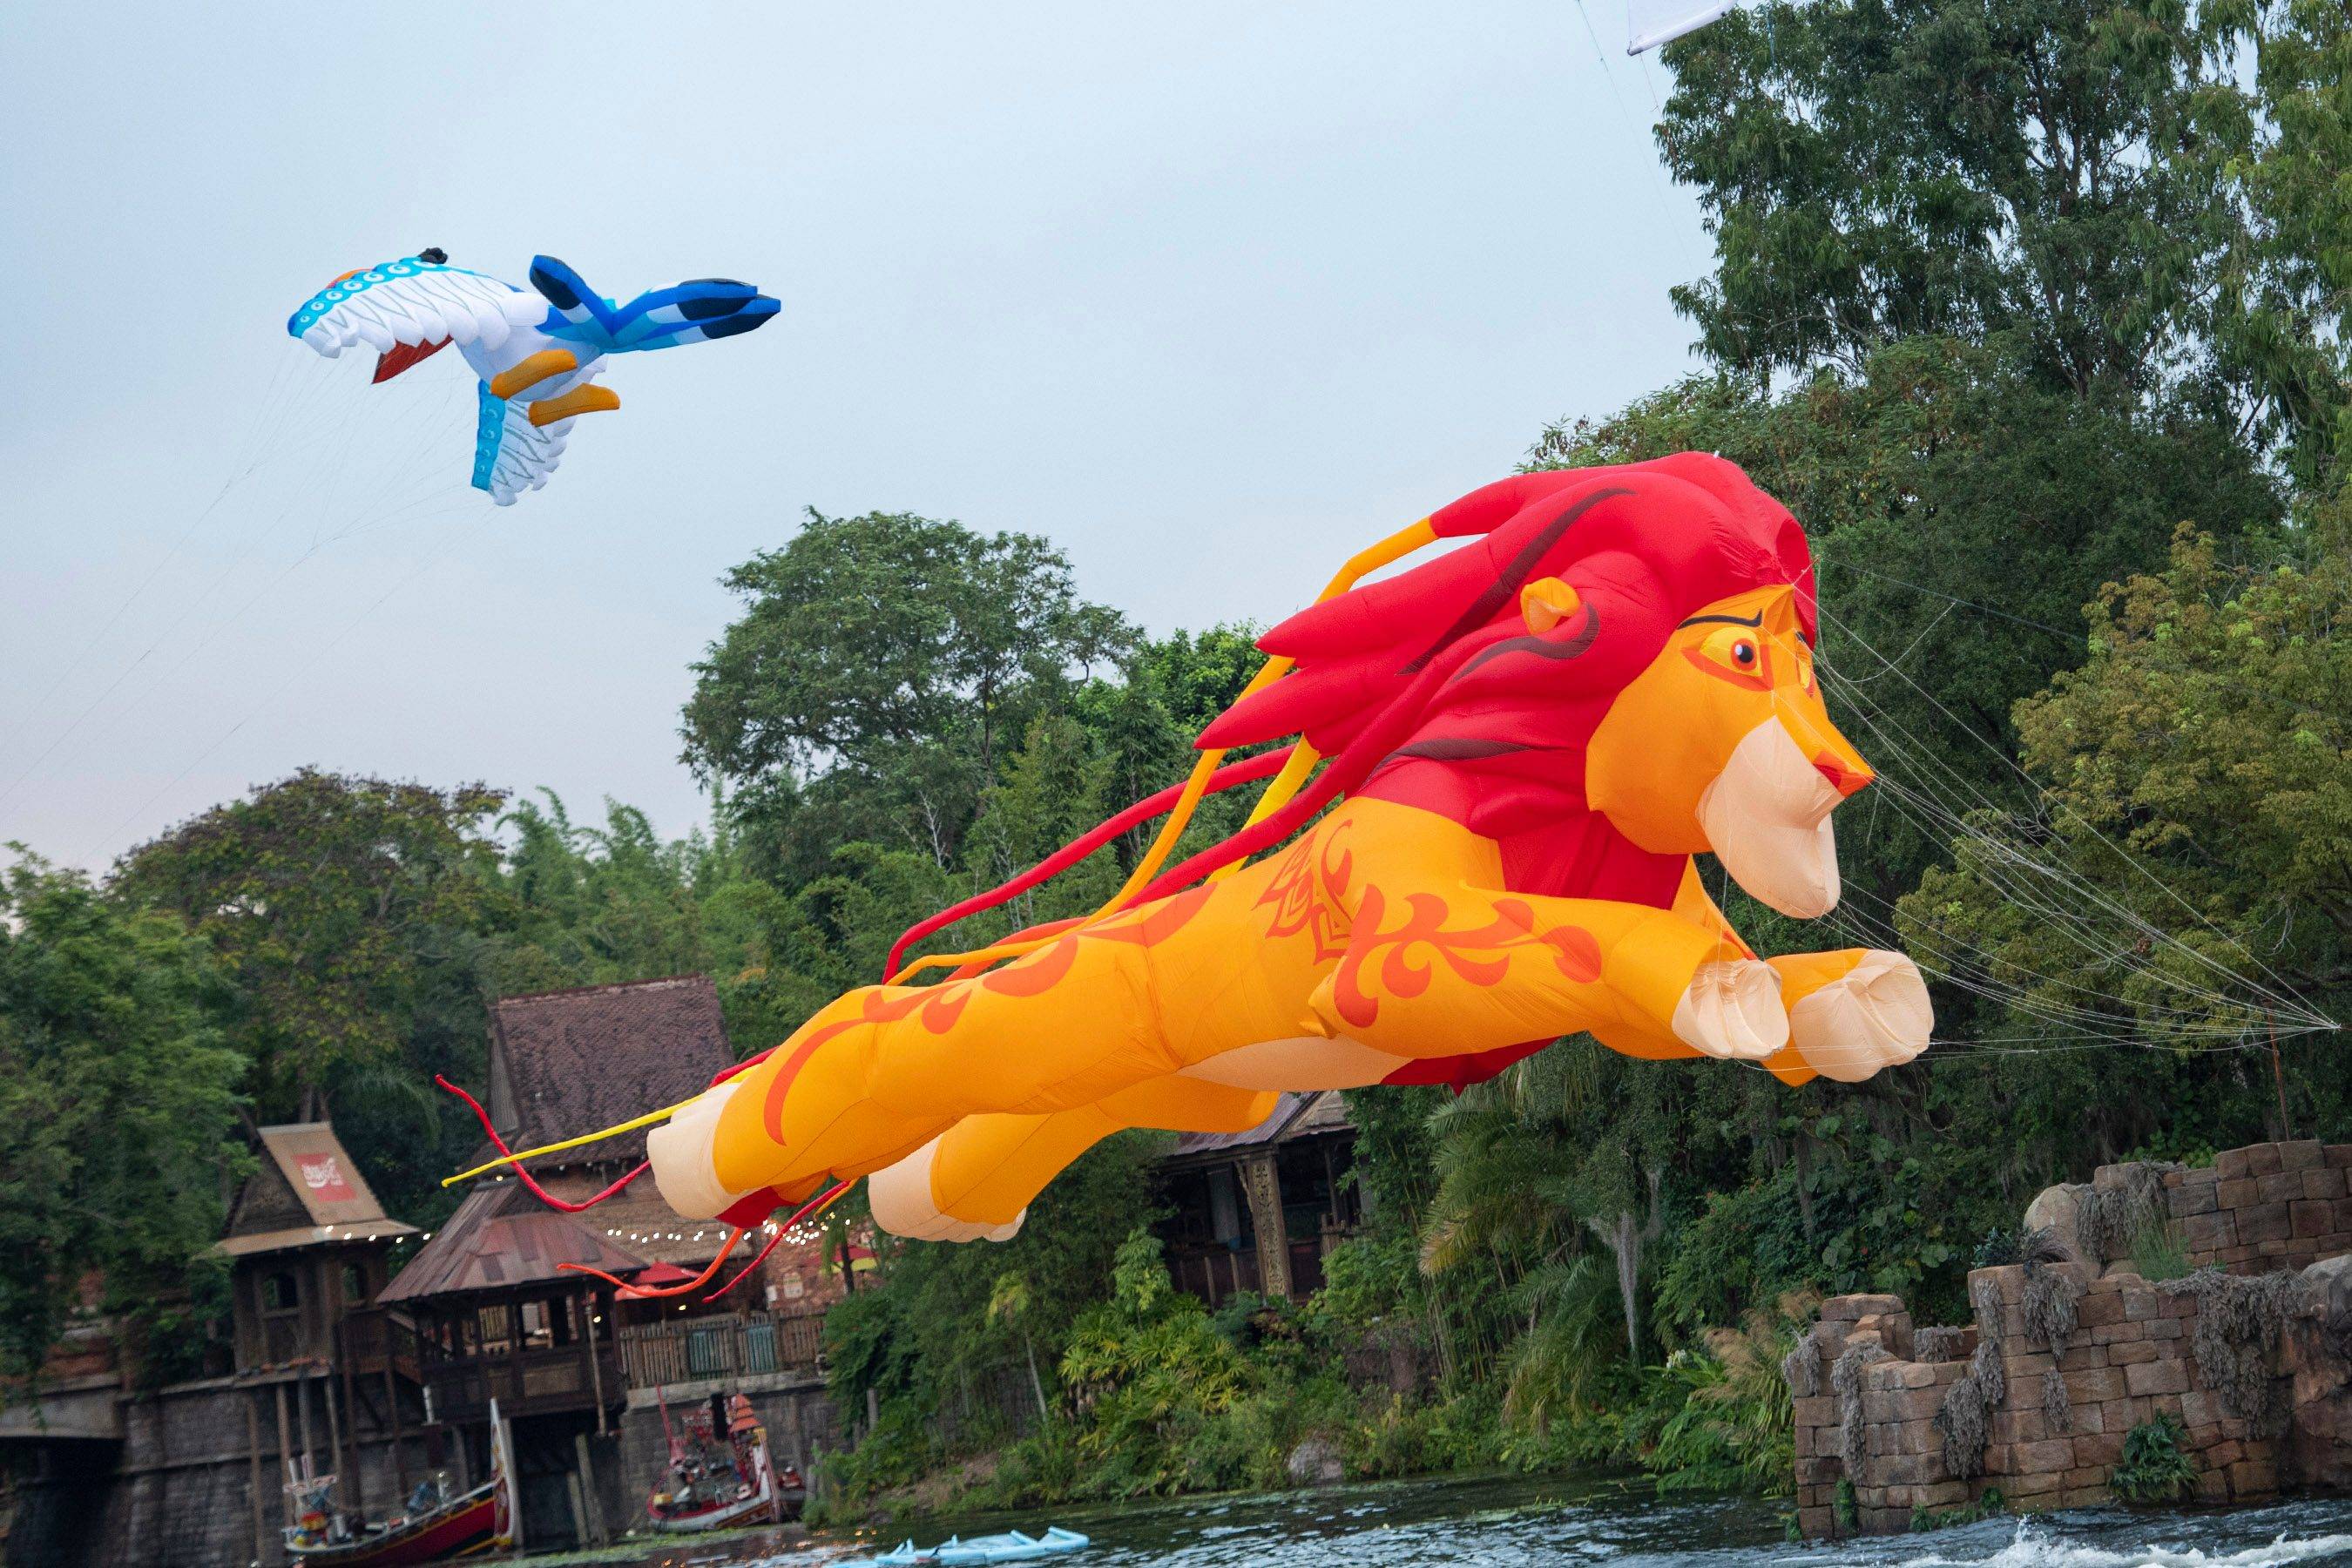 First look at Disney KiteTails from Disney's Animal Kingdom